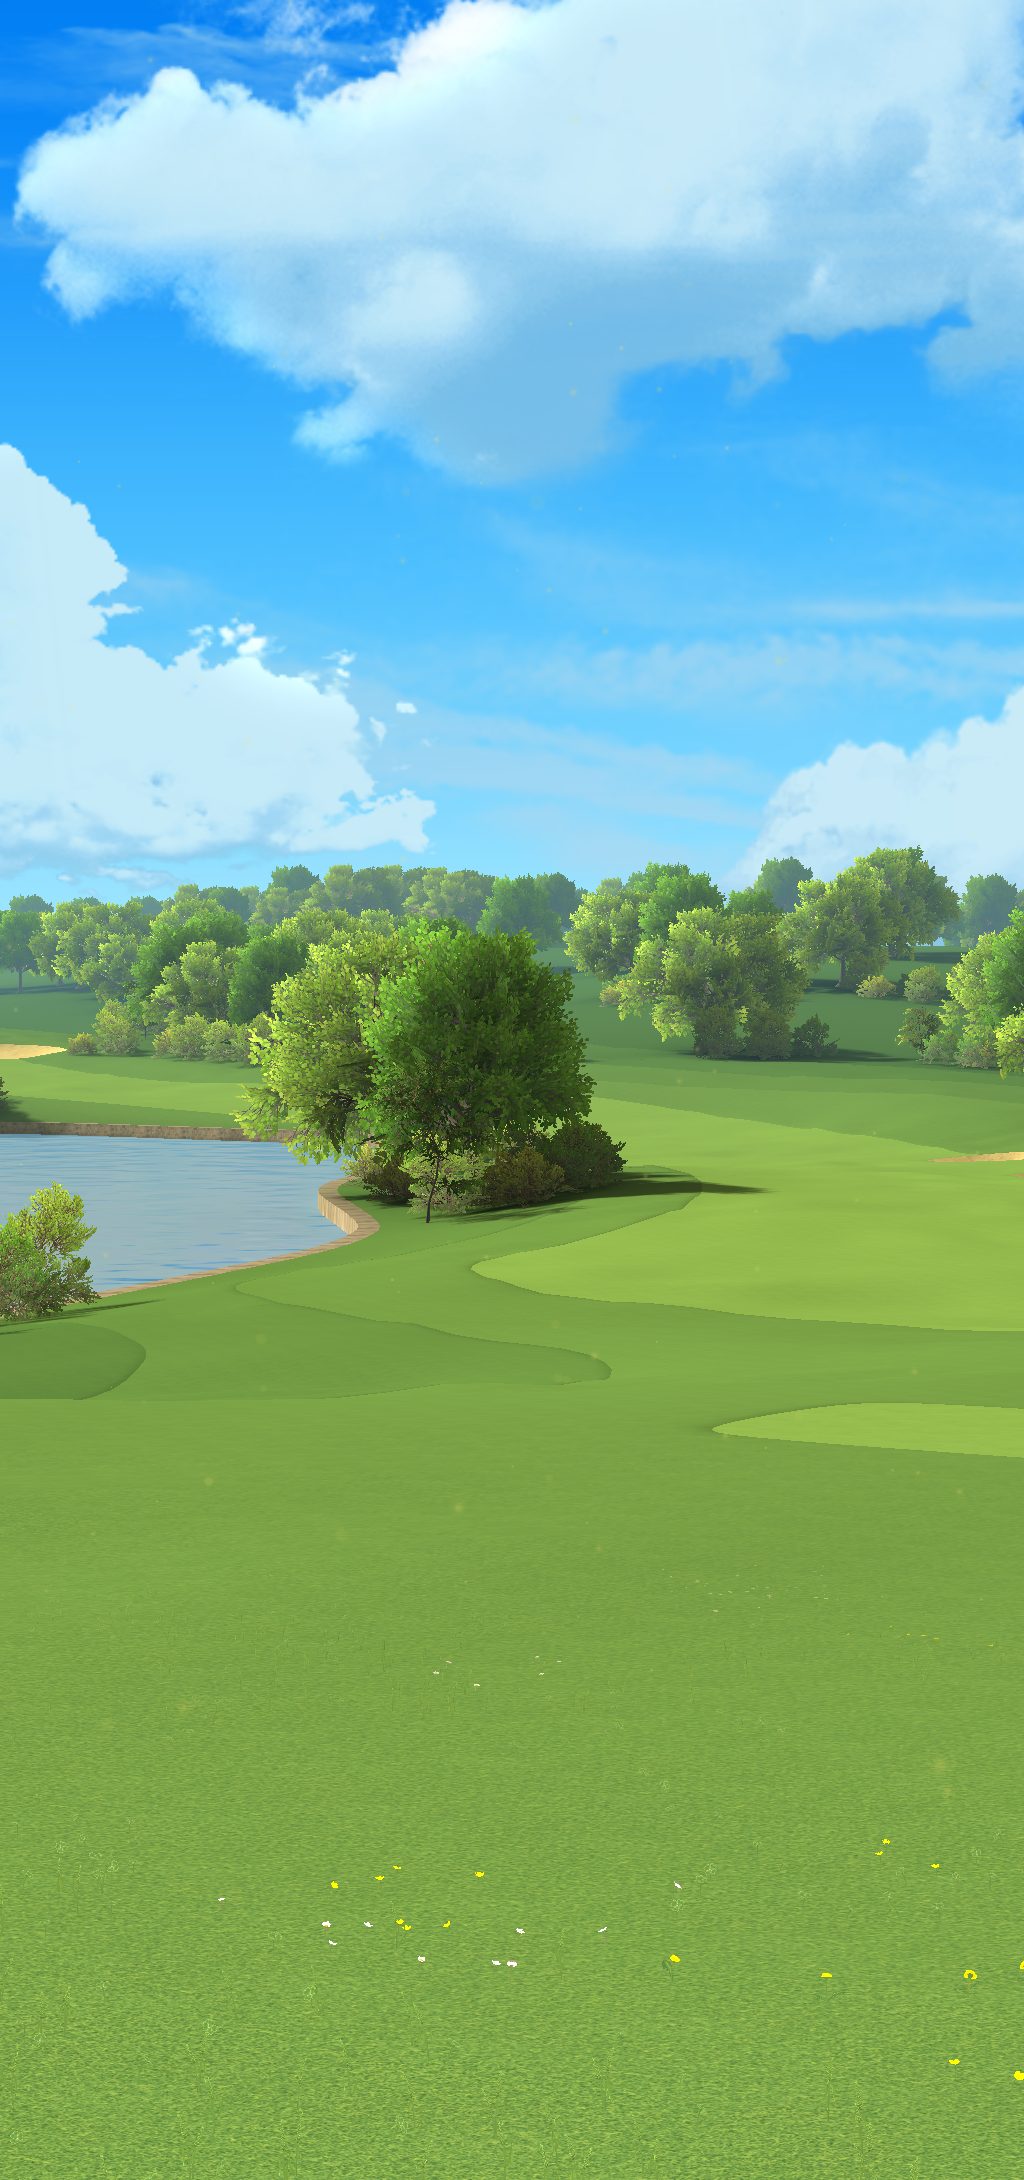 Golf Clash awardwinning mobile game by Playdemic Official EA Site